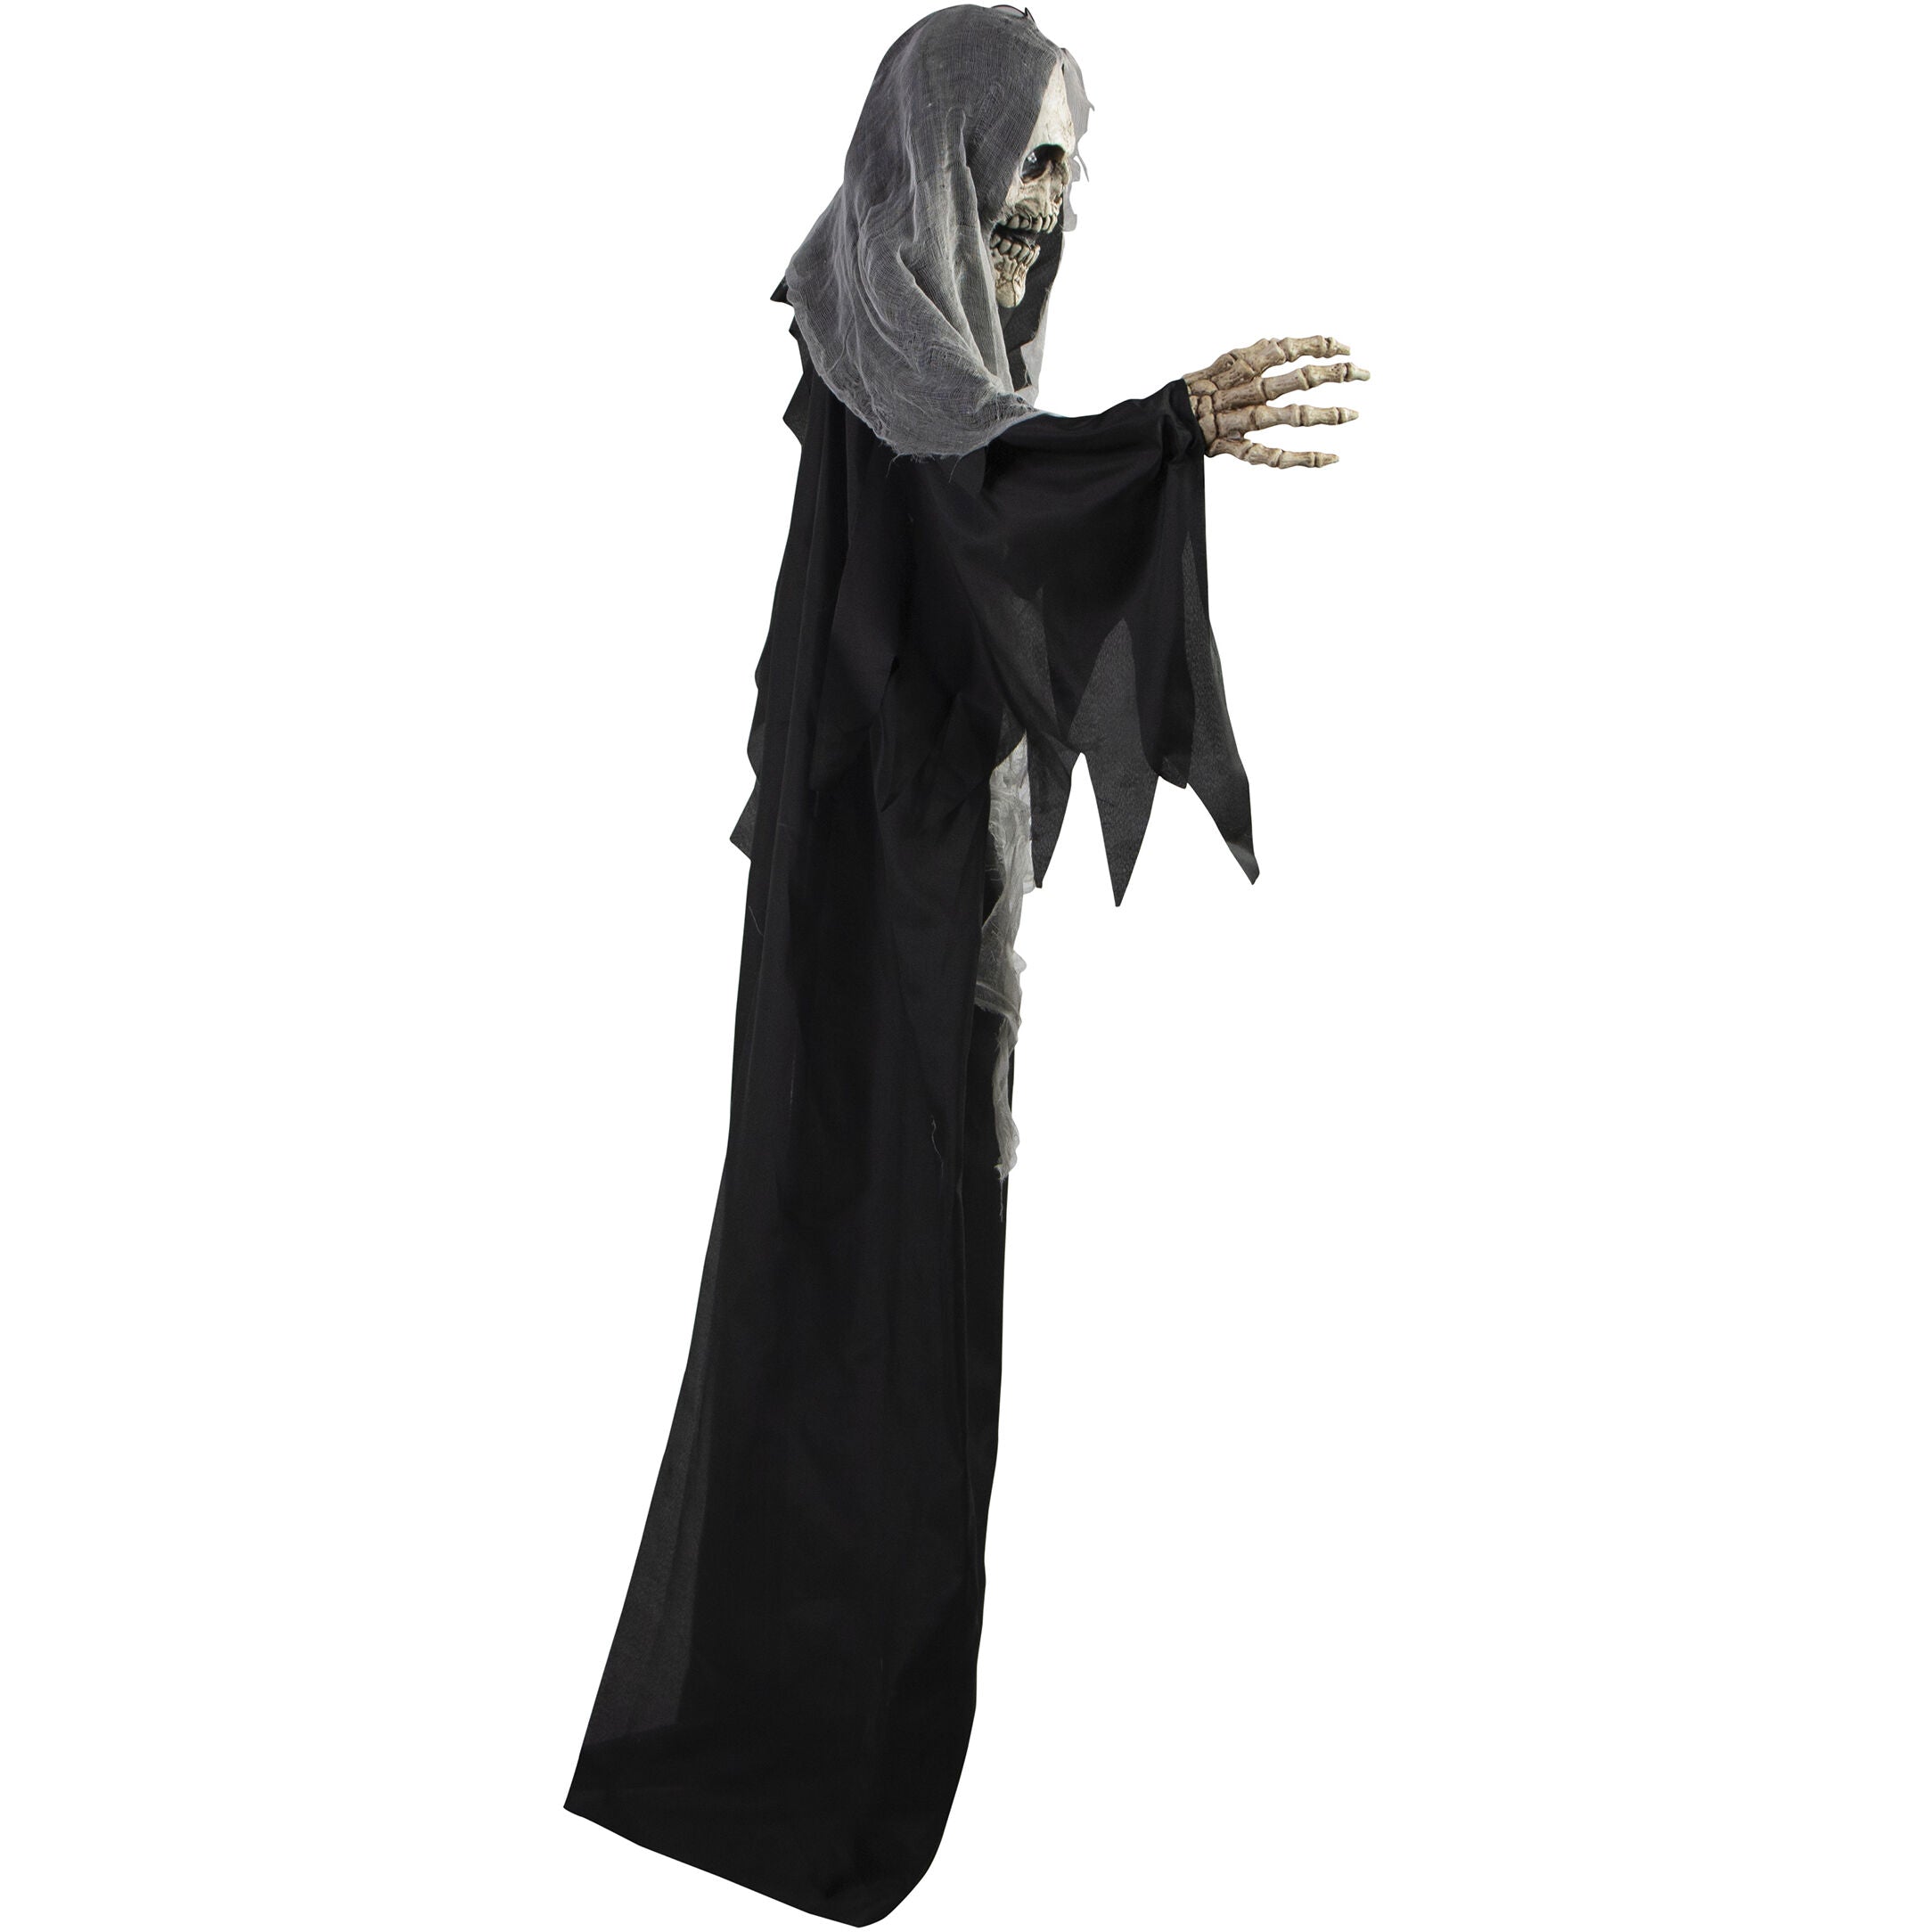 Haunted Hill Farm -  71-In. Lampa Solais the Animated Gruesome Reaper w/ Lantern, Indoor or Covered Outdoor Halloween Decoration